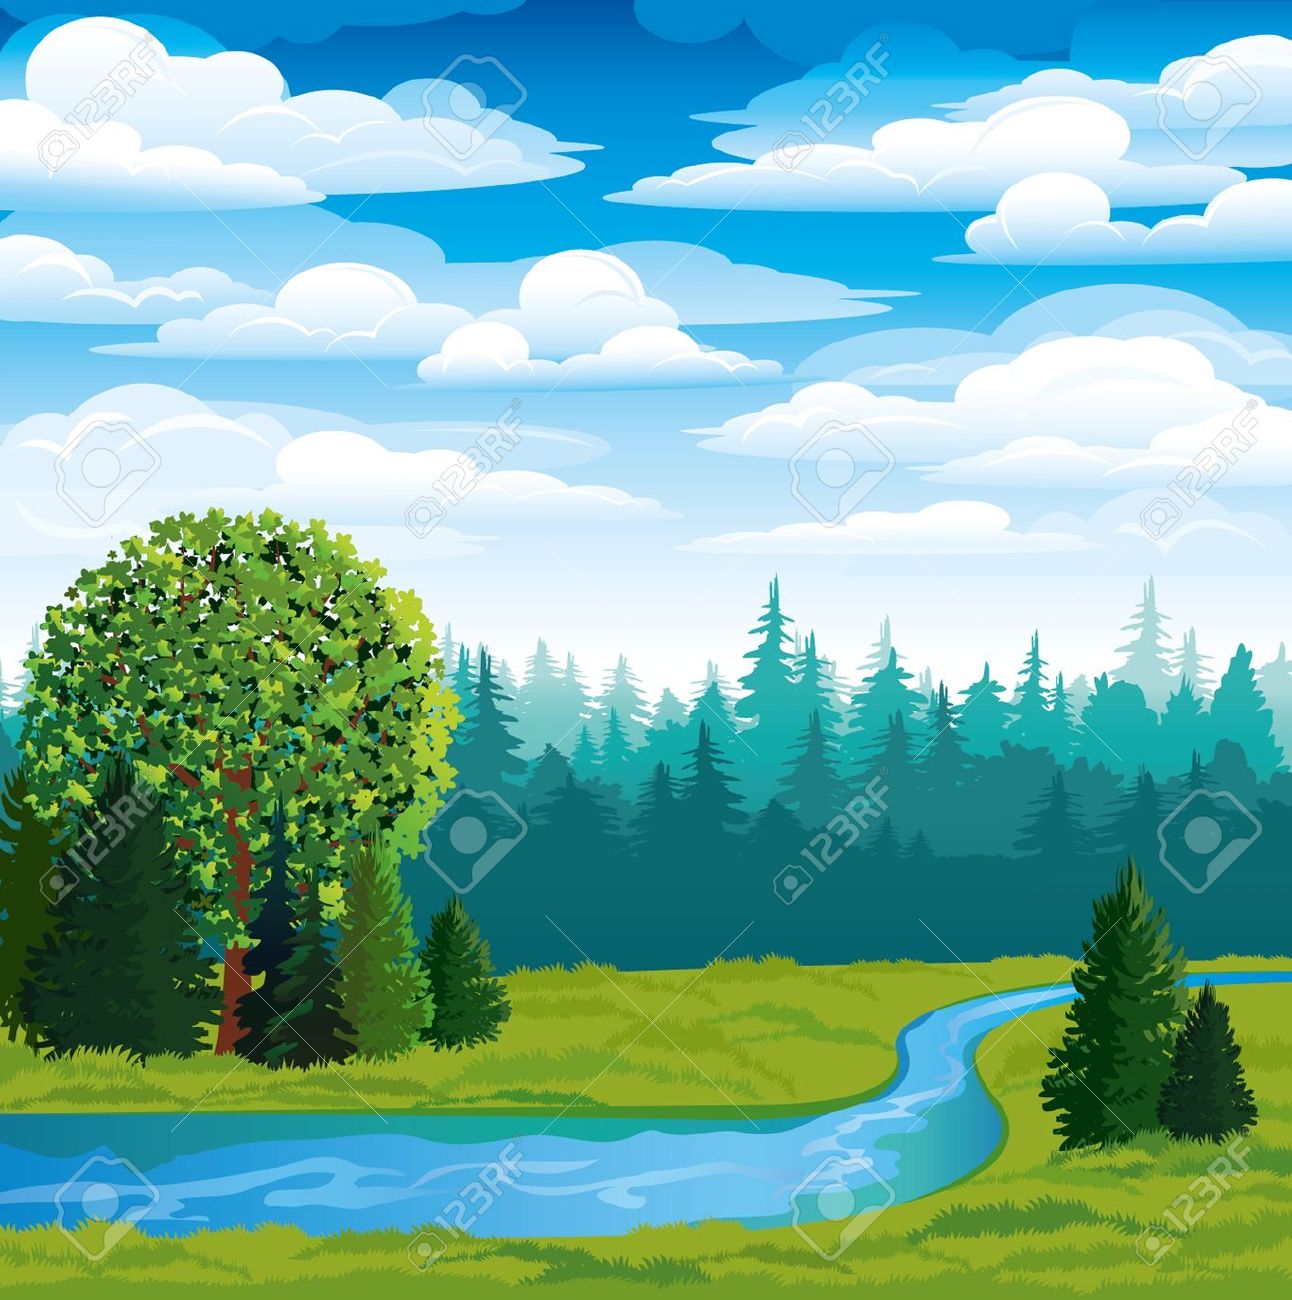 free clipart of river - photo #33